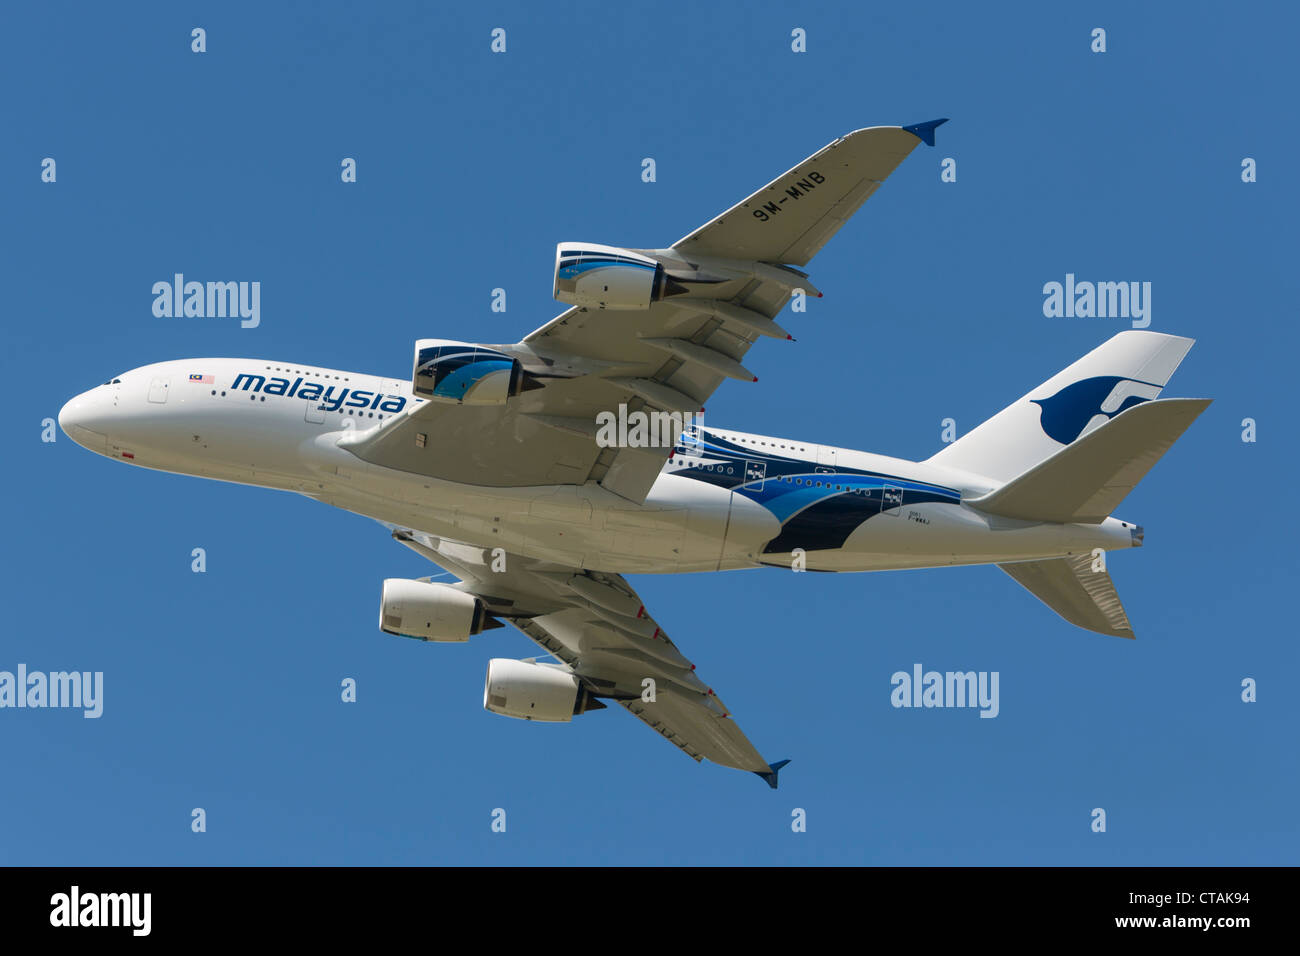 Farnborough International Airshow 2012. Malaysia Airlines new Airbus A380 during a display flight. Stock Photo